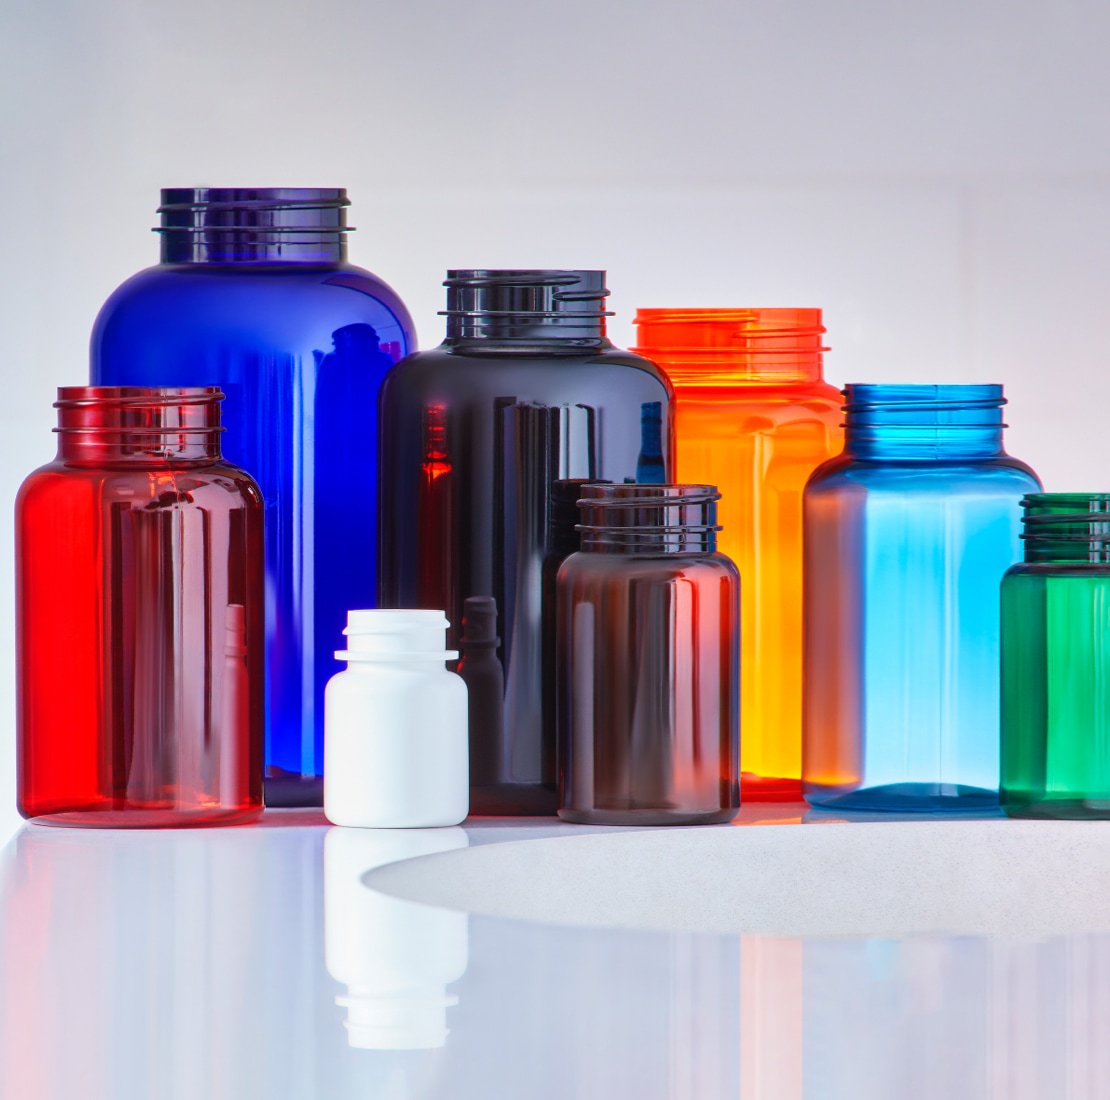 assorted bottles with different colors for nutraceutical and supplements